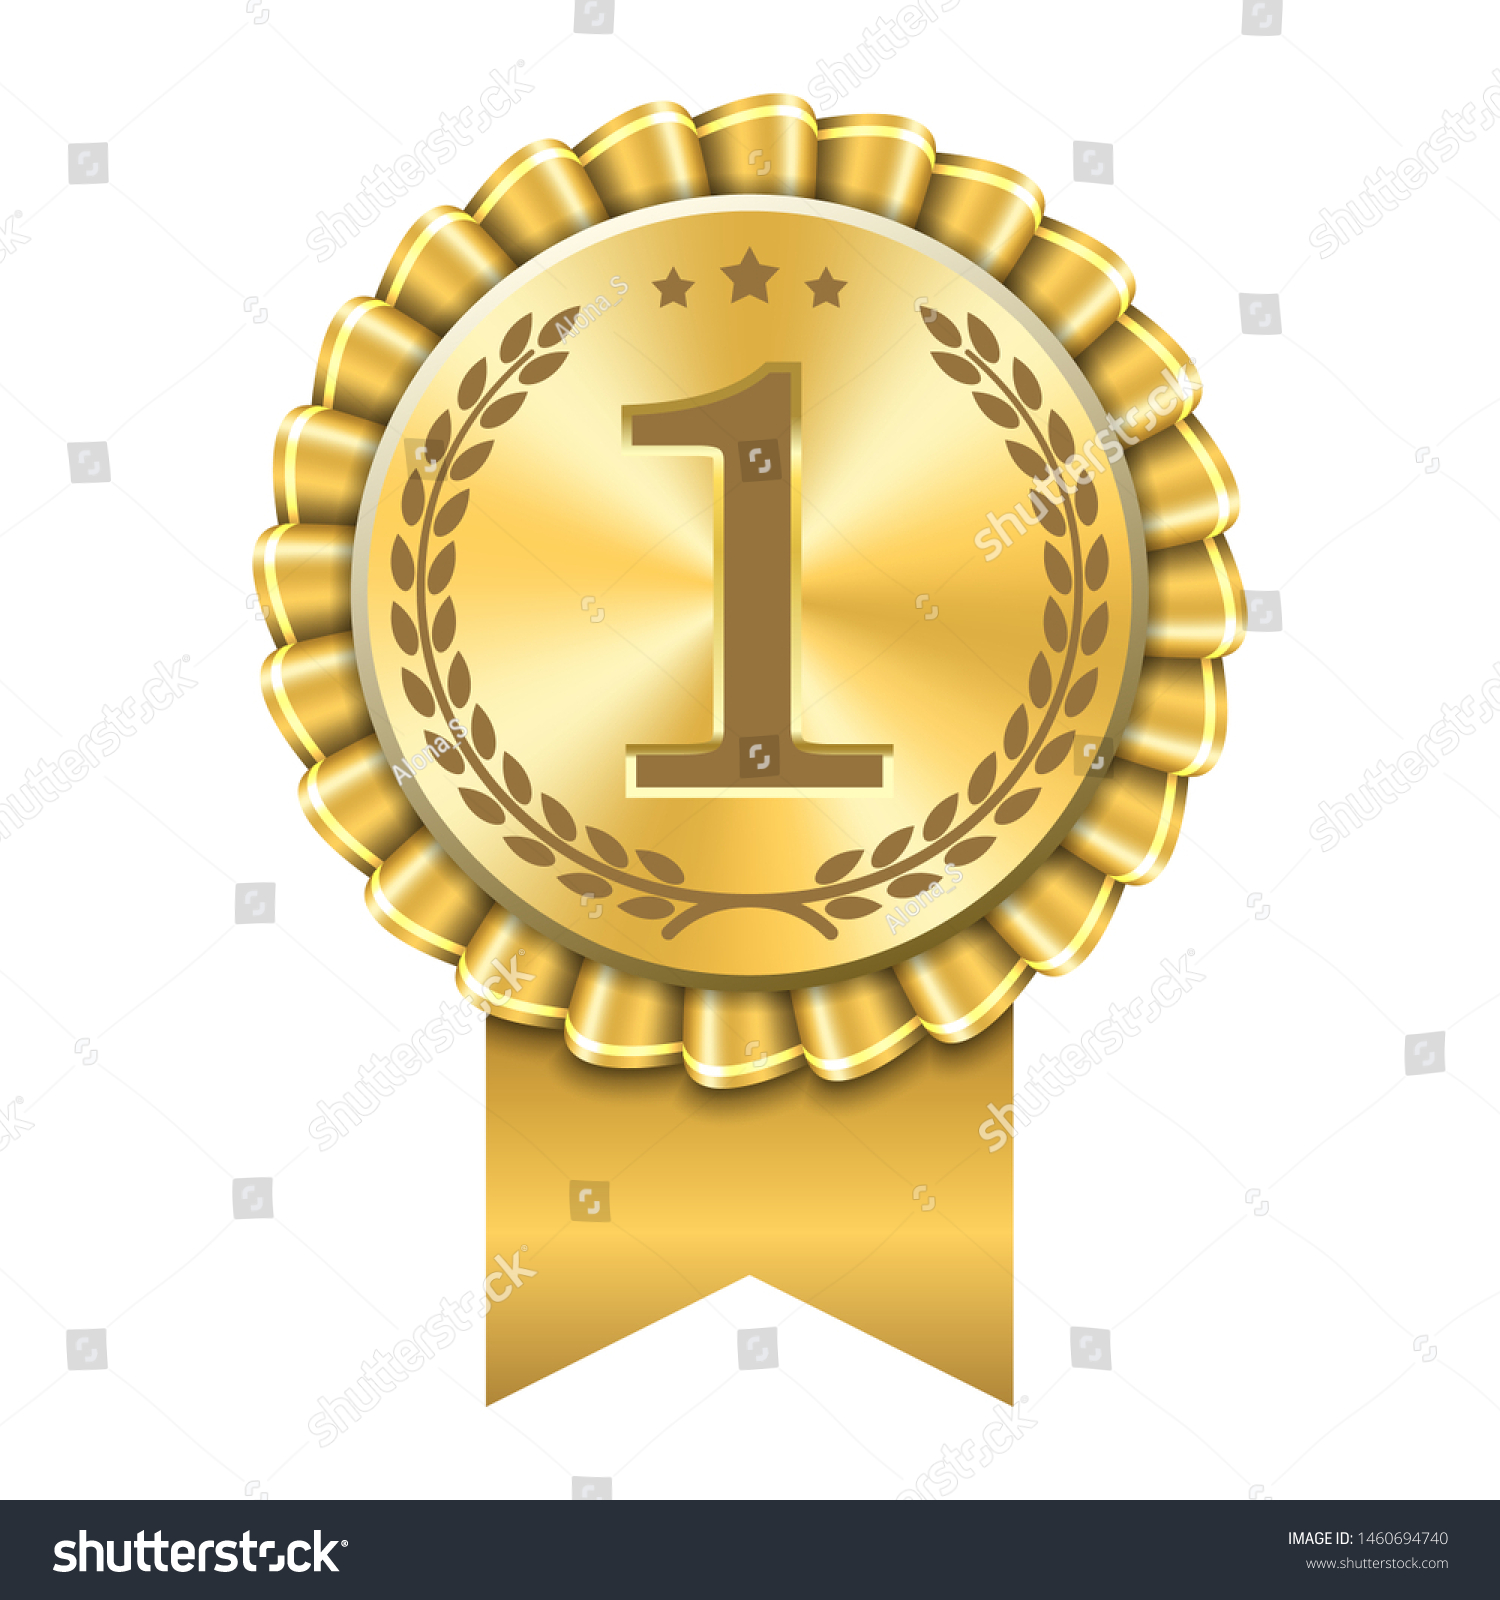 Award ribbon gold icon number first. Design winner golden medal 1 prize. Symbol best trophy, 1st success champion, one sport competition honor, achievement leadership, victory Vector illustration #1460694740